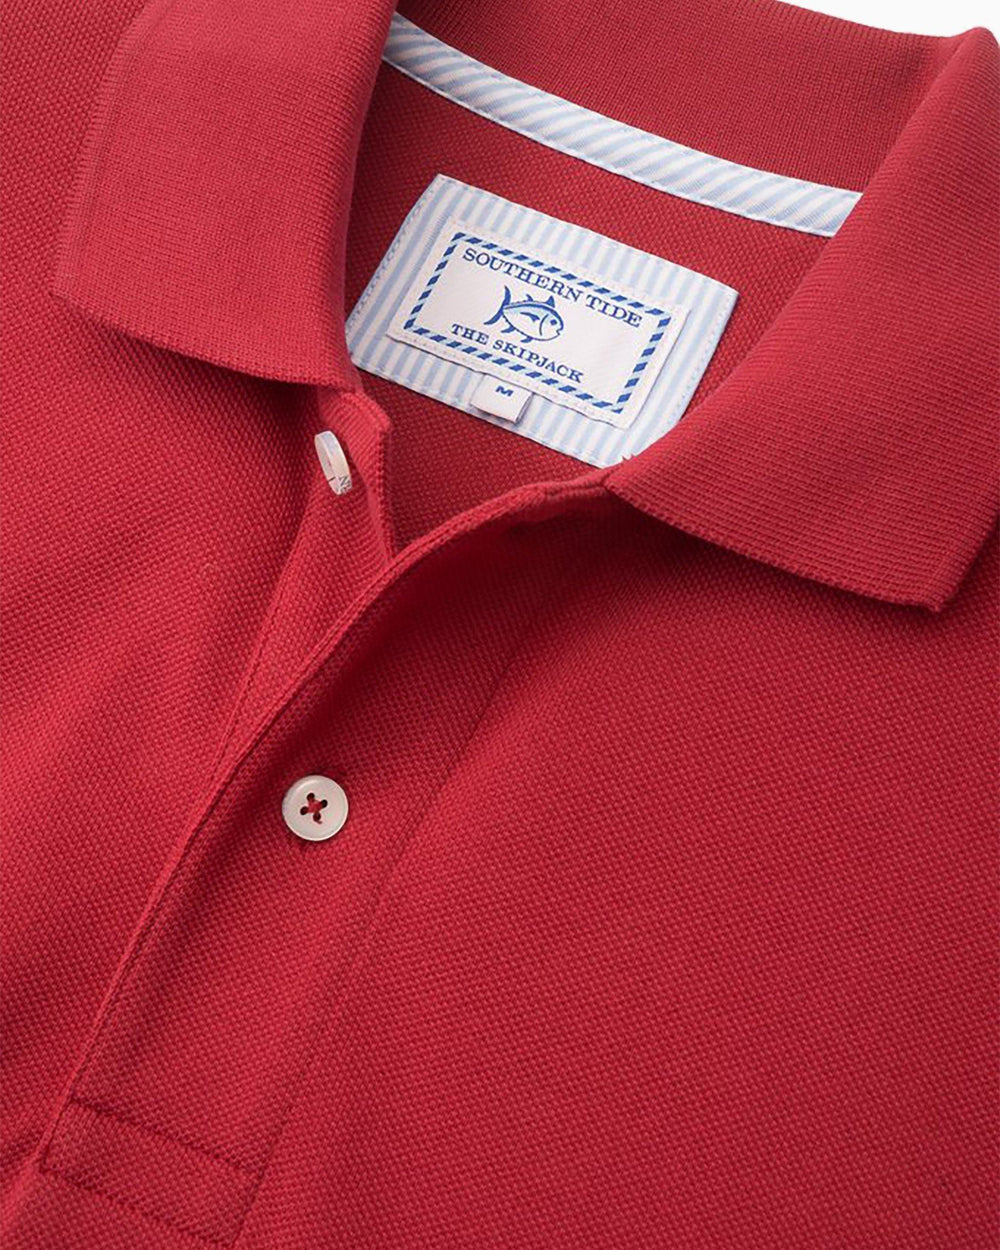 The detail of the Men's Red Alabama Crimson Tide Pique Polo Shirt by Southern Tide - Crimson